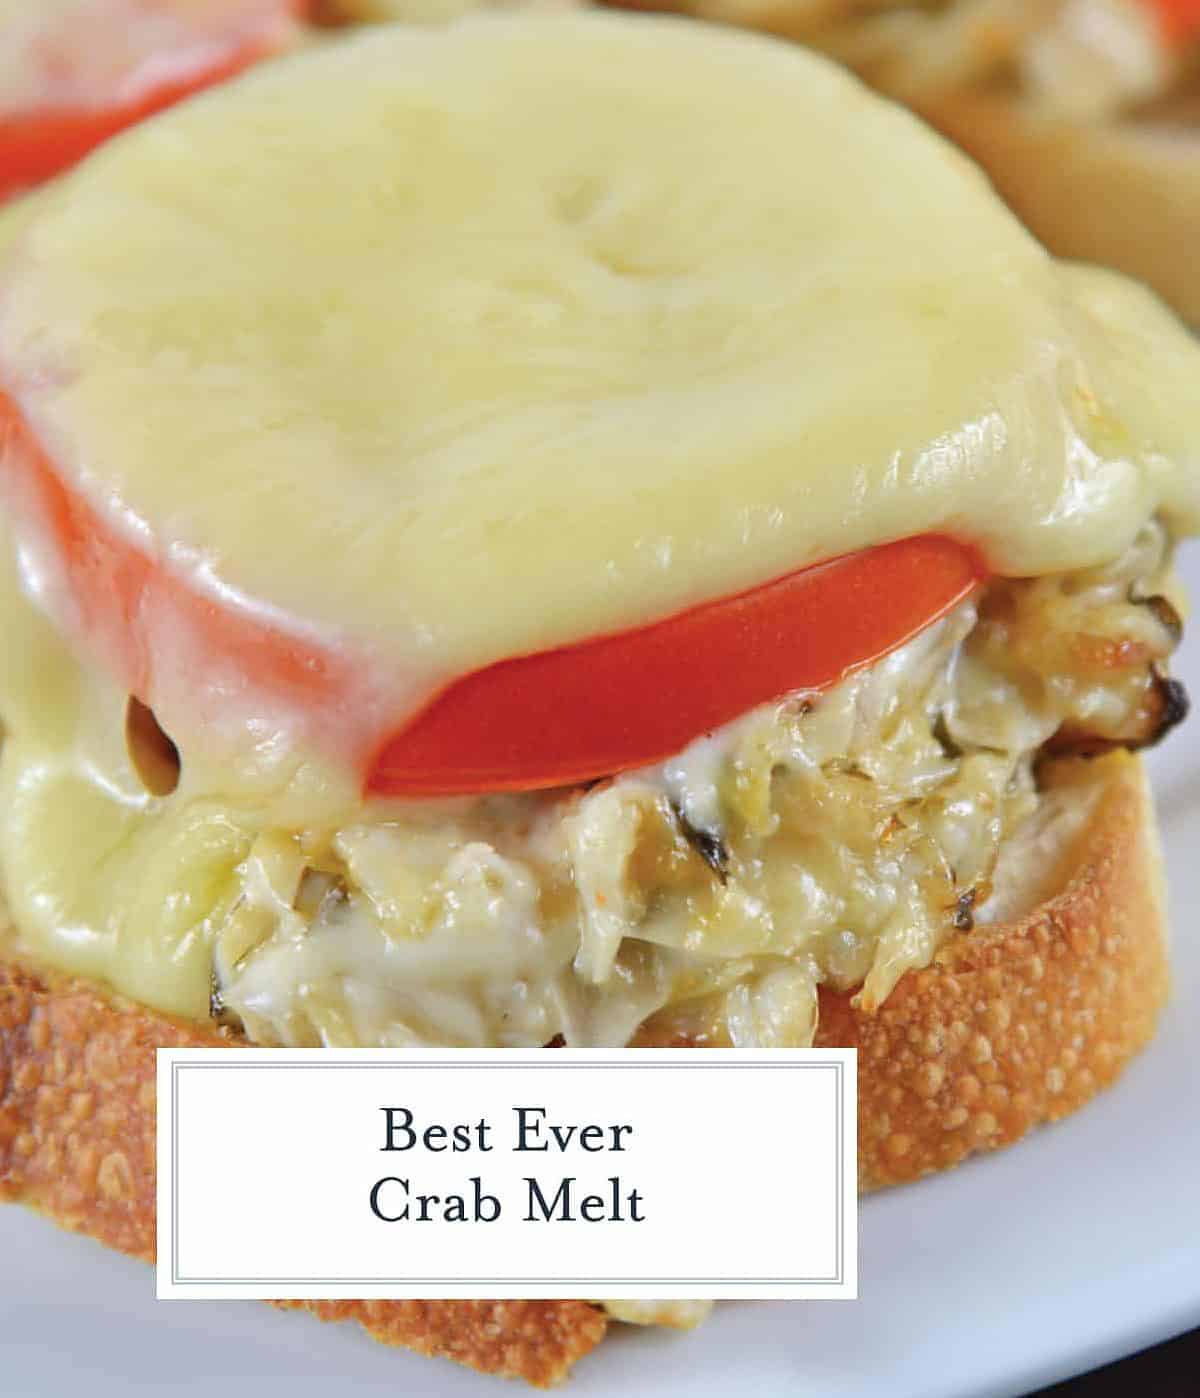  This open-face crab and artichoke melt is just begging to be devoured!